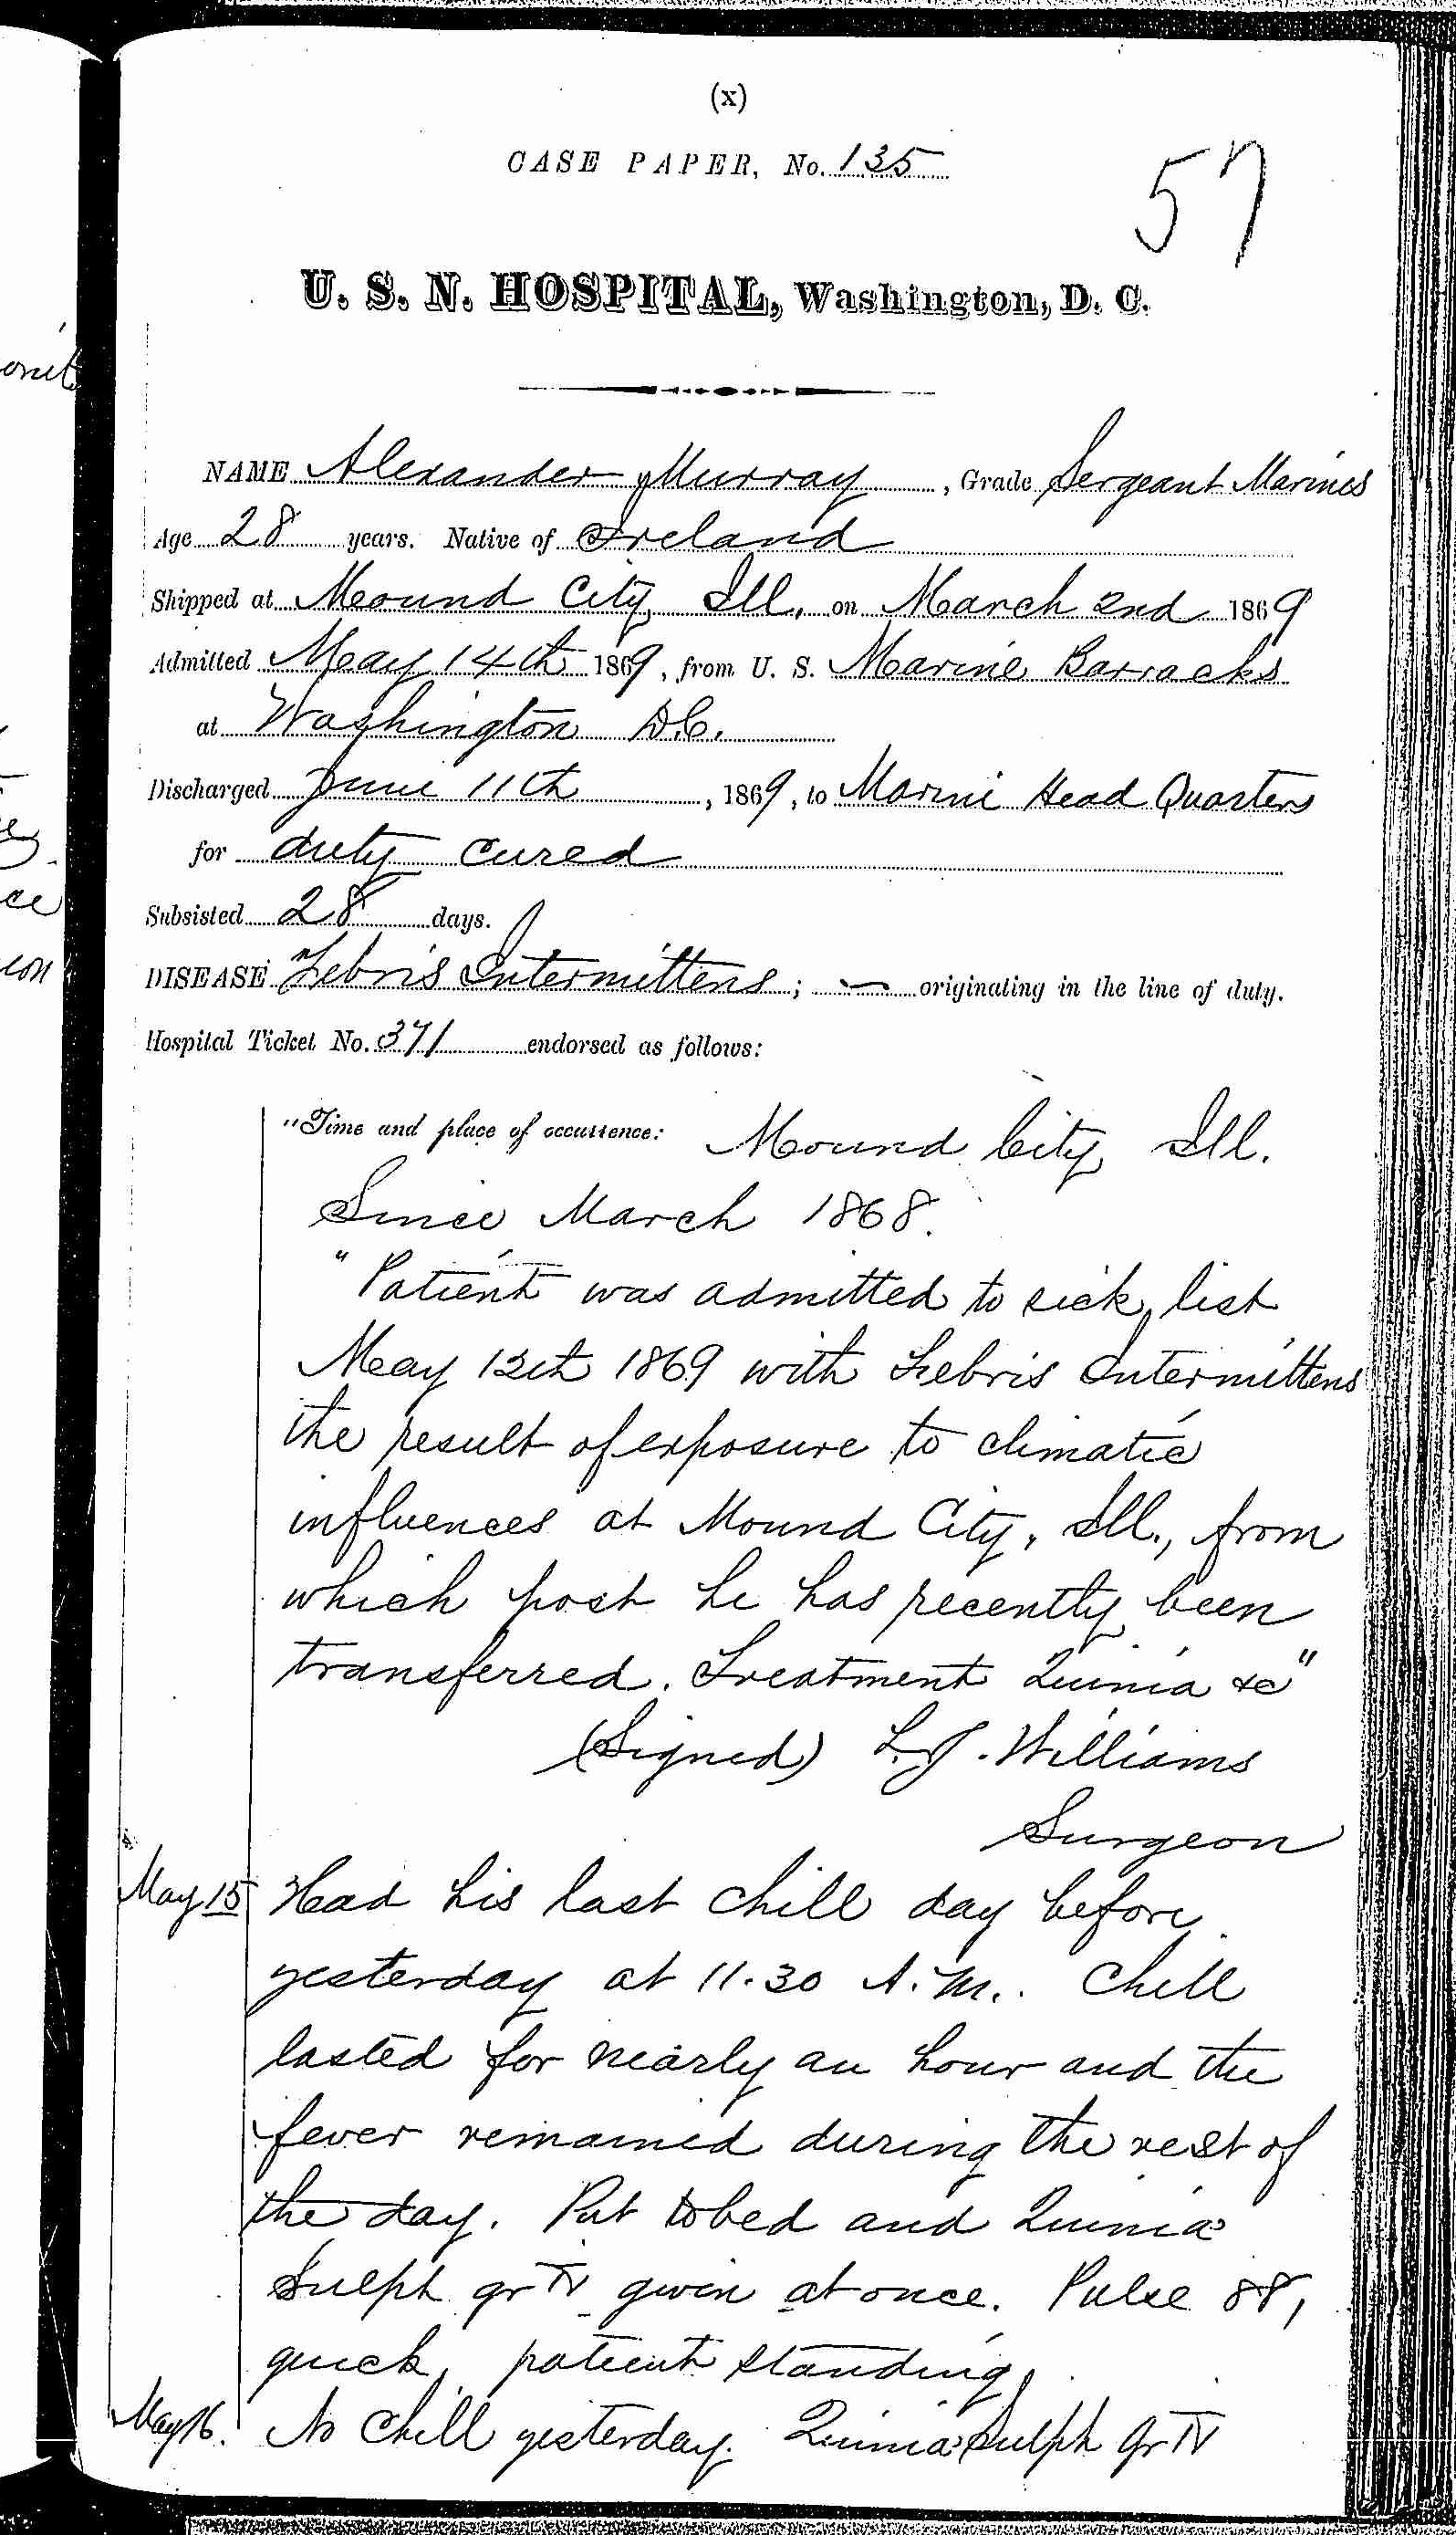 Entry for Alexander Murray (page 1 of 4) in the log Hospital Tickets and Case Papers - Naval Hospital - Washington, D.C. - 1868-69